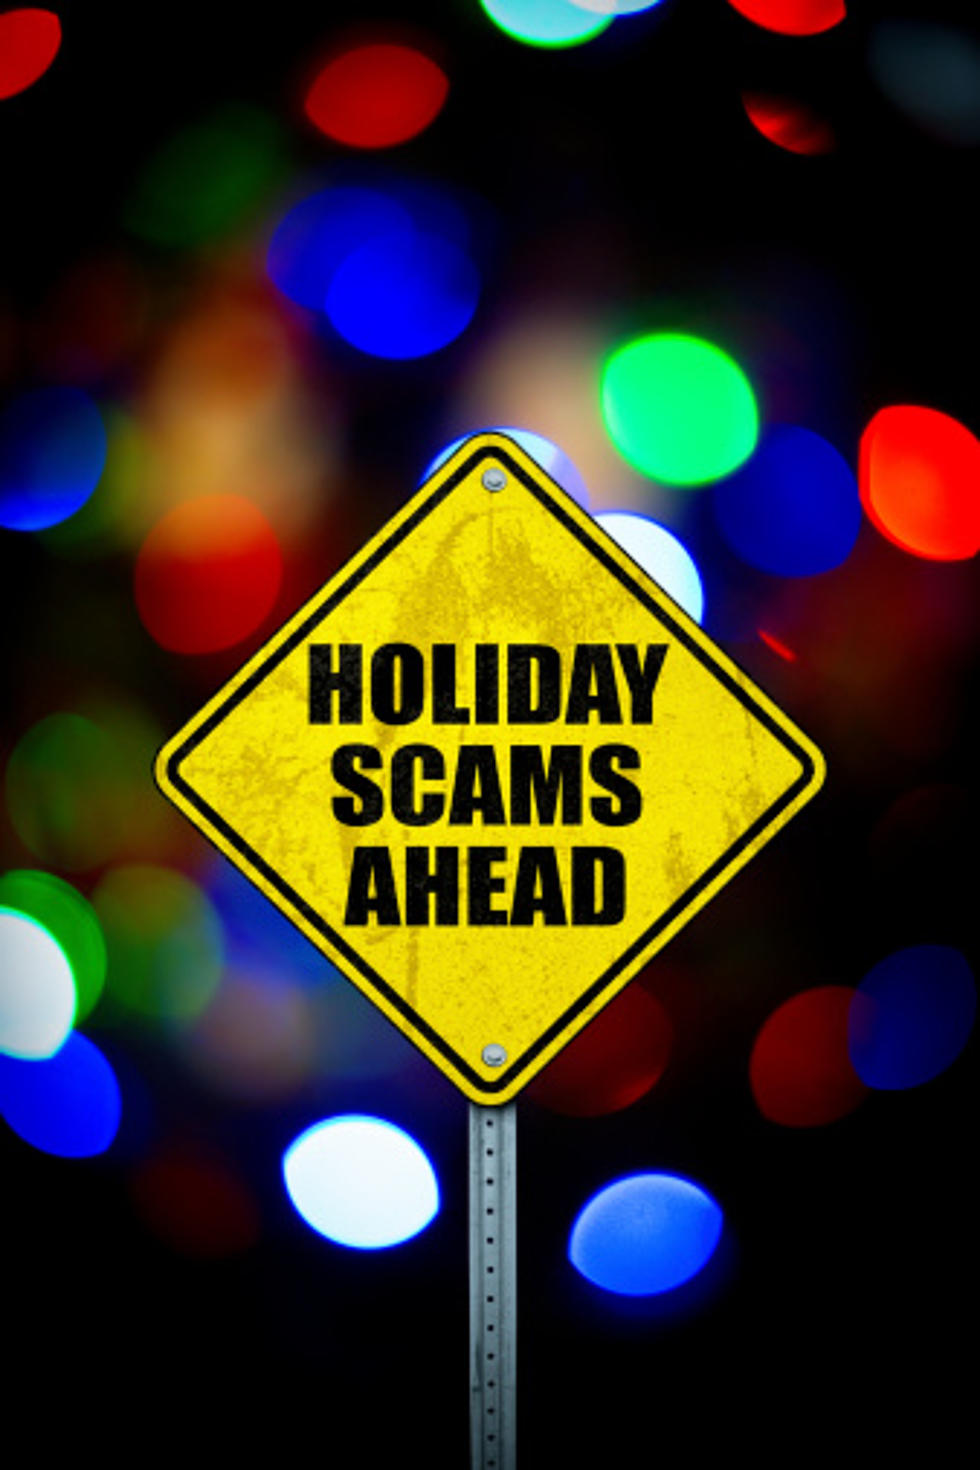 Illinois Is One Of The Most “At-Risk” States For Holiday Scams